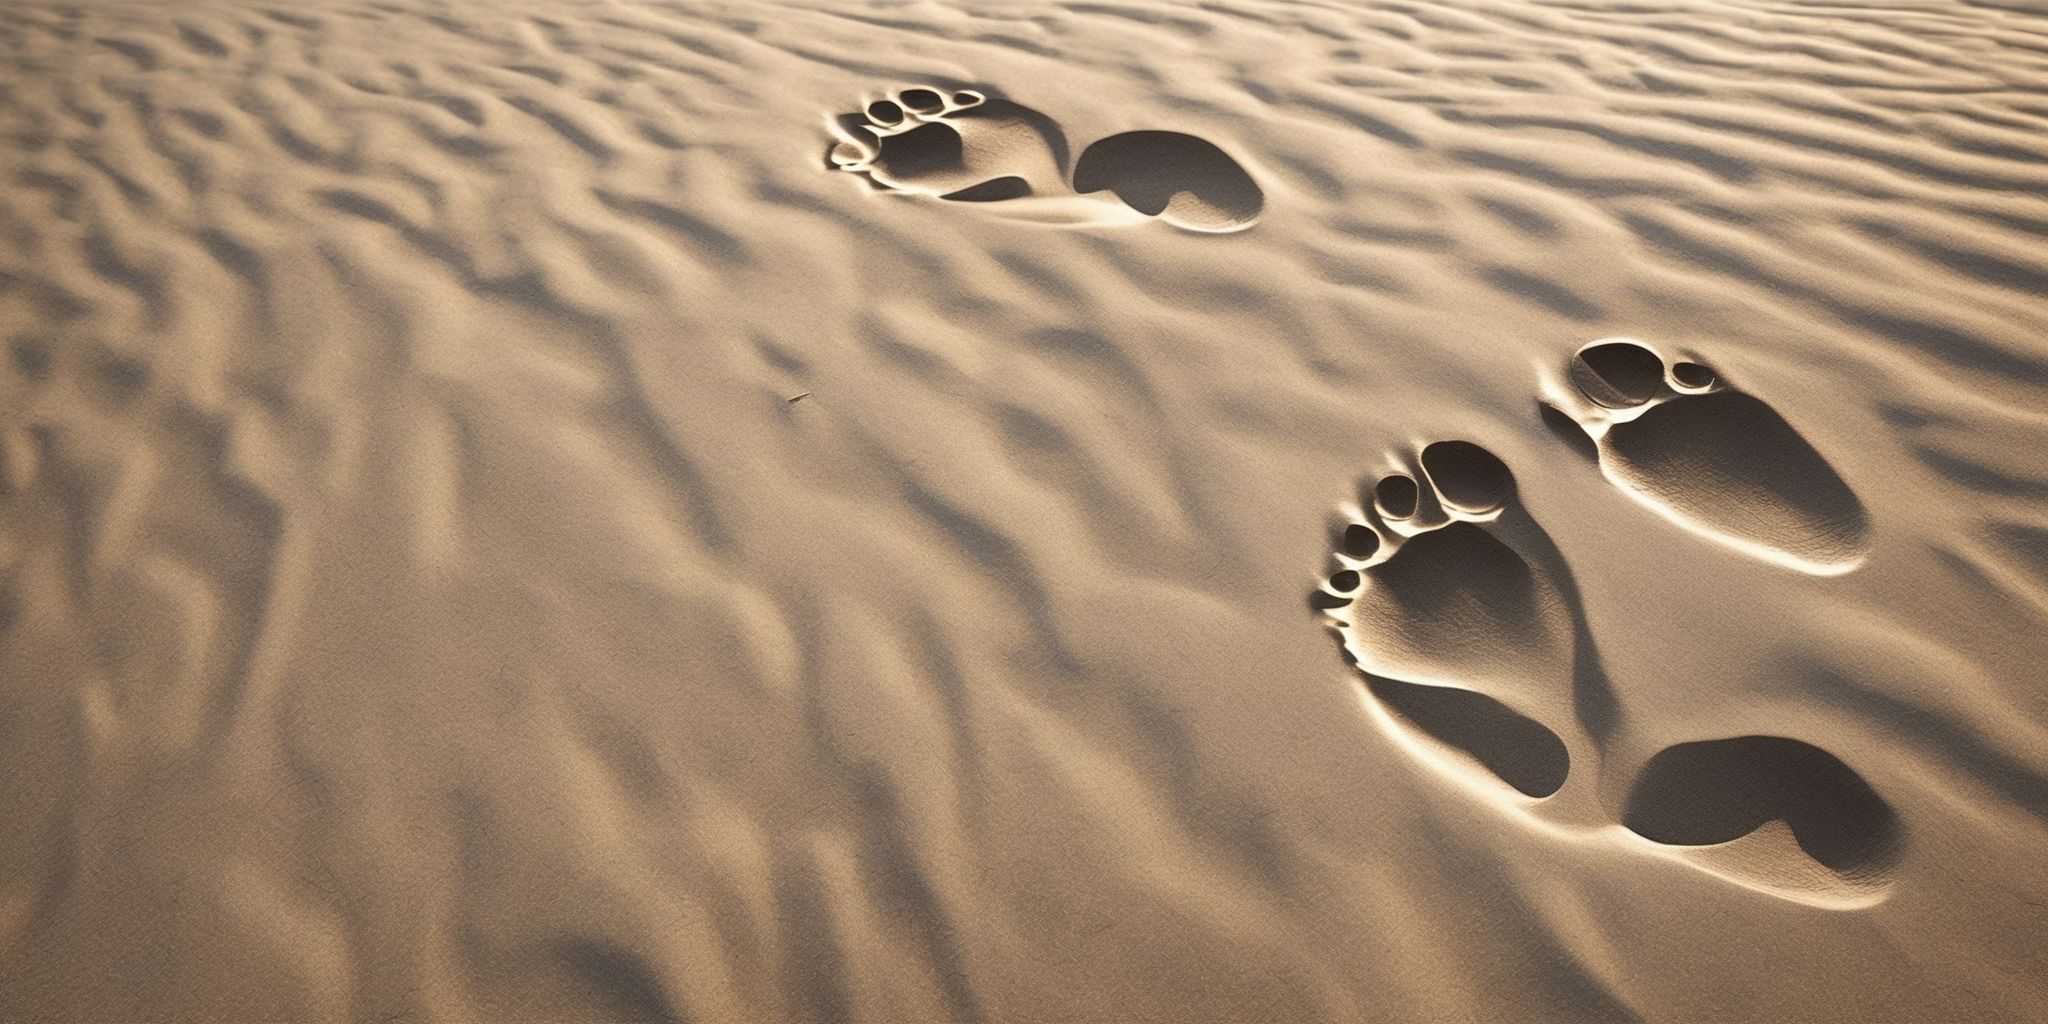 Footprints  in realistic, photographic style